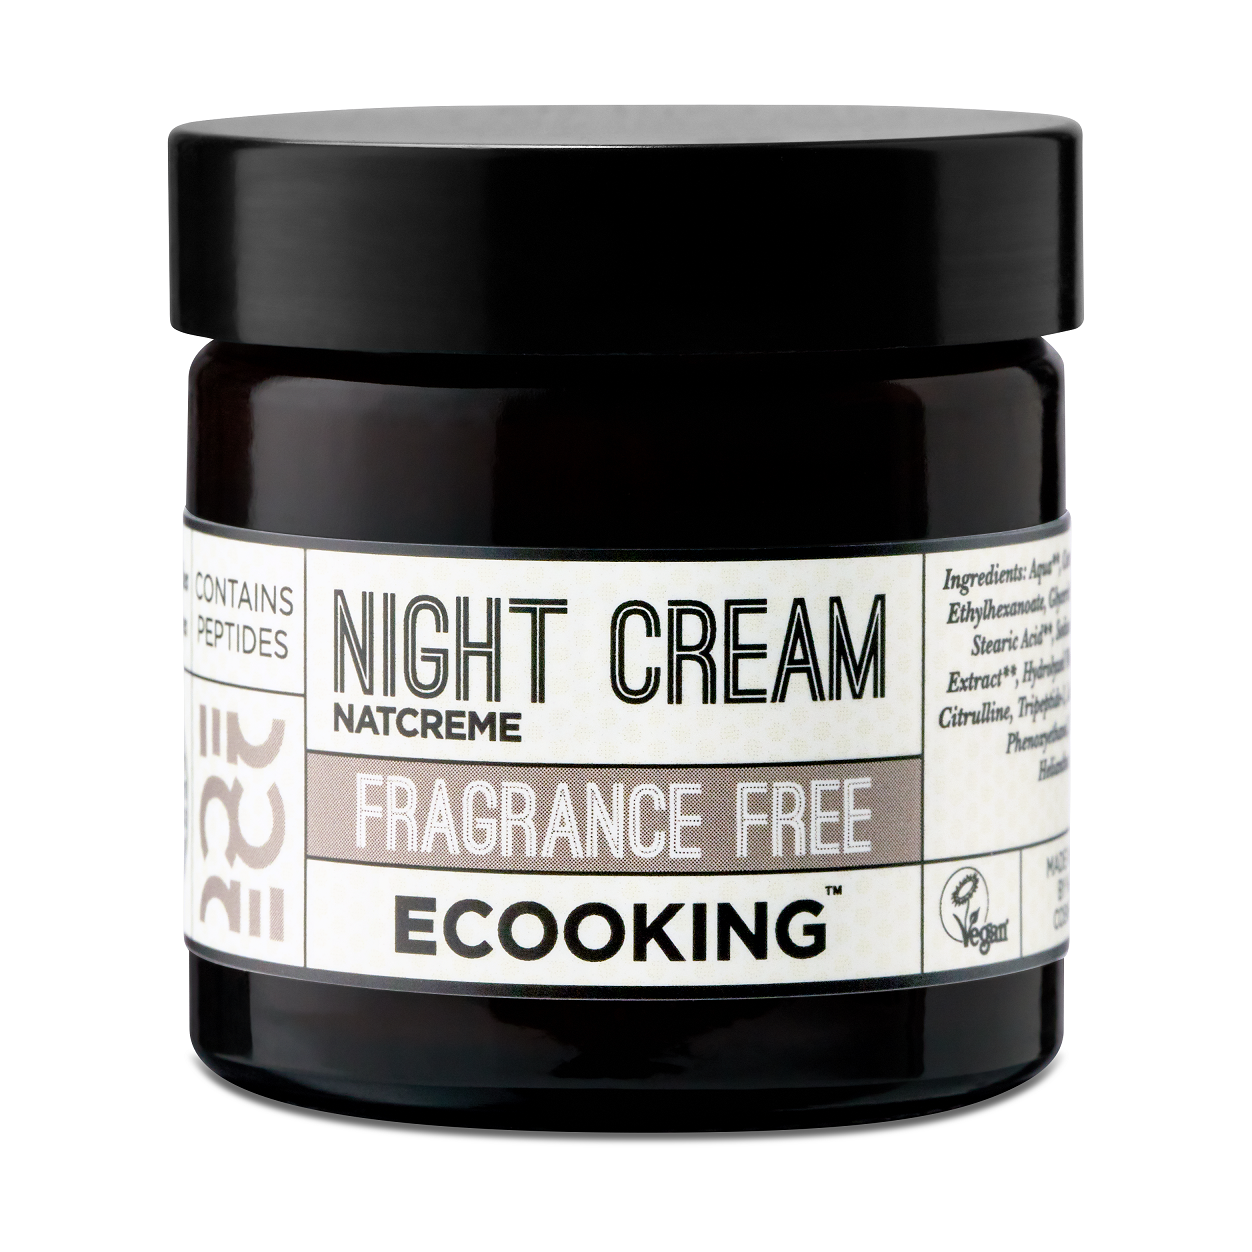 Fragrance Free Night cream from Ecooking, is a super effective night cream that counteracts wrinkles and fine lines. With continuous use, the cream will reduce the depth of wrinkles and lines. This cream contains Argireline, which causes the muscles to relax, giving a softer expression. At the same time, the cream boosts your skin's collagen level so that your skin retains a youthful glow. Ecooking Night Cream maintains a long-lasting moisture balance in the skin and is good for a mature skin.